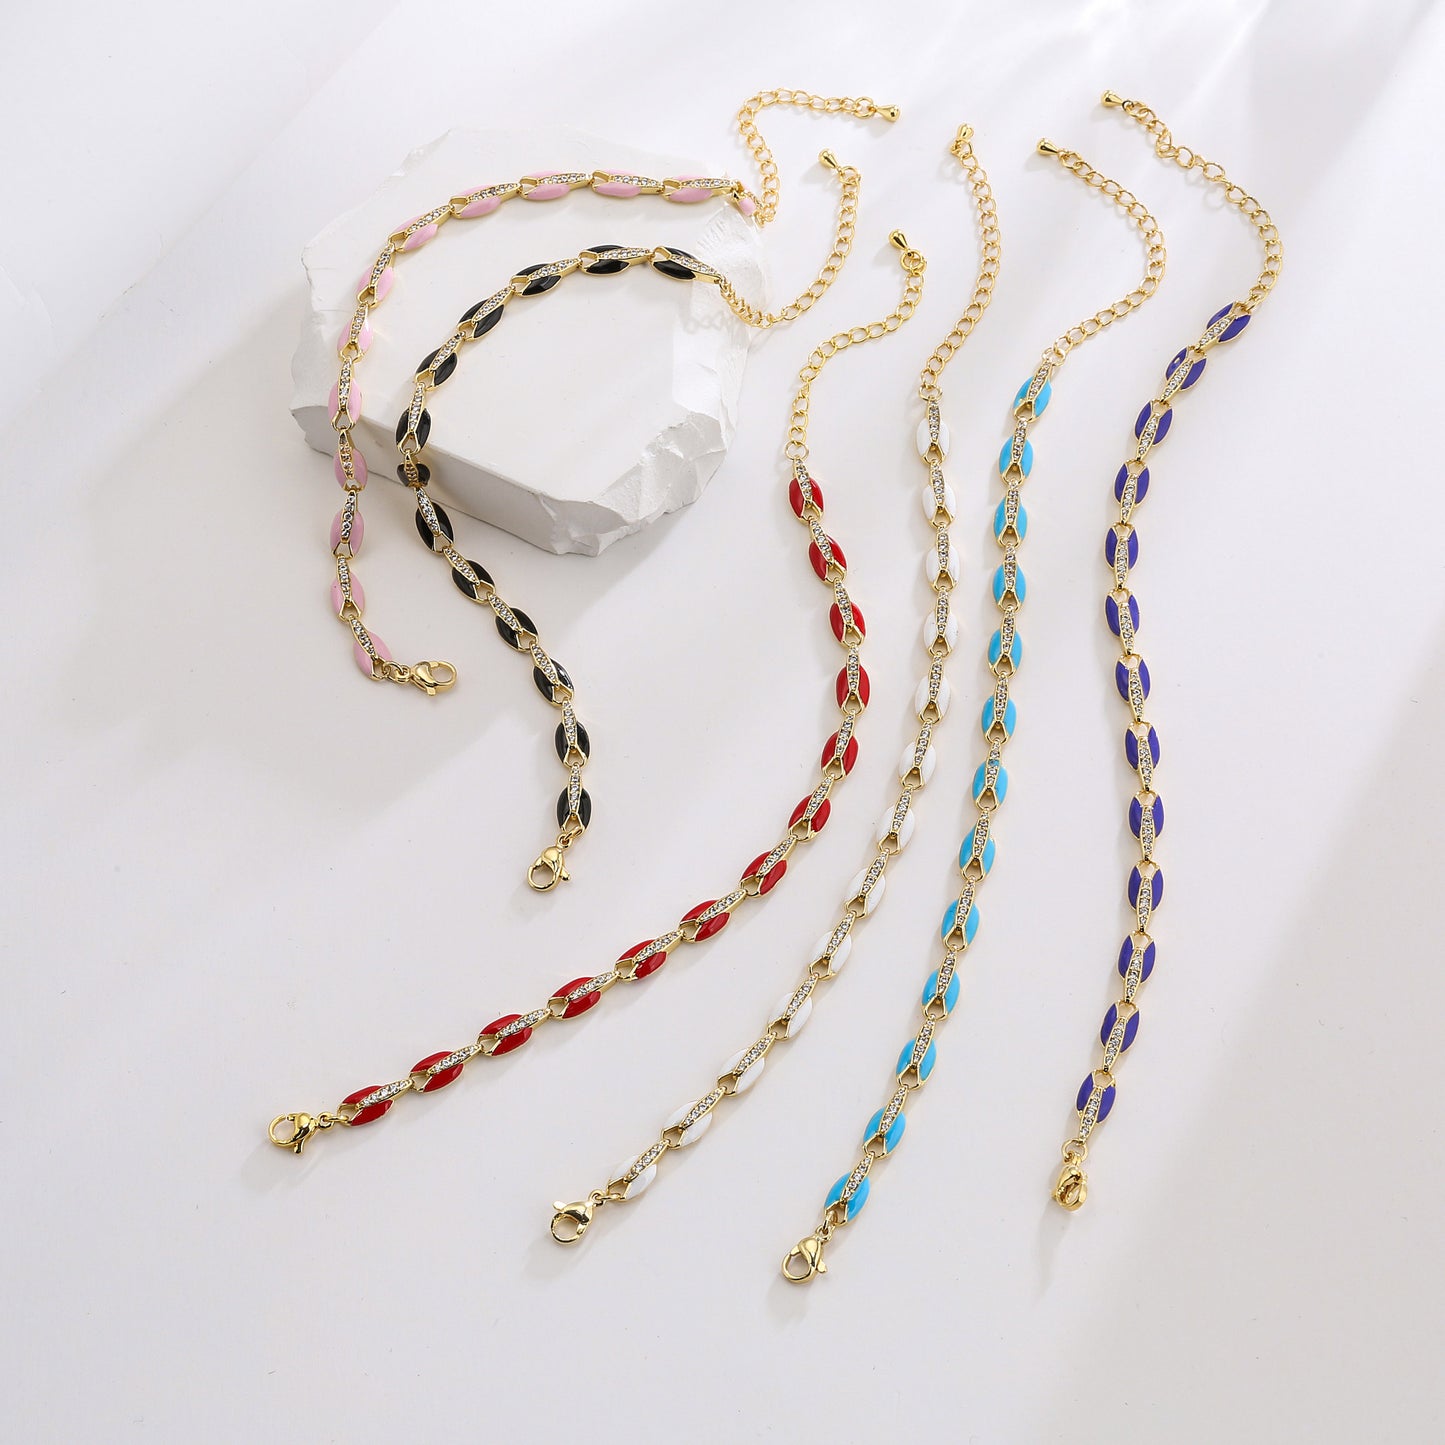 Colorful Dripping Oil Necklace Bracelet Set Micro Inlaid Zircon Copper Ornament